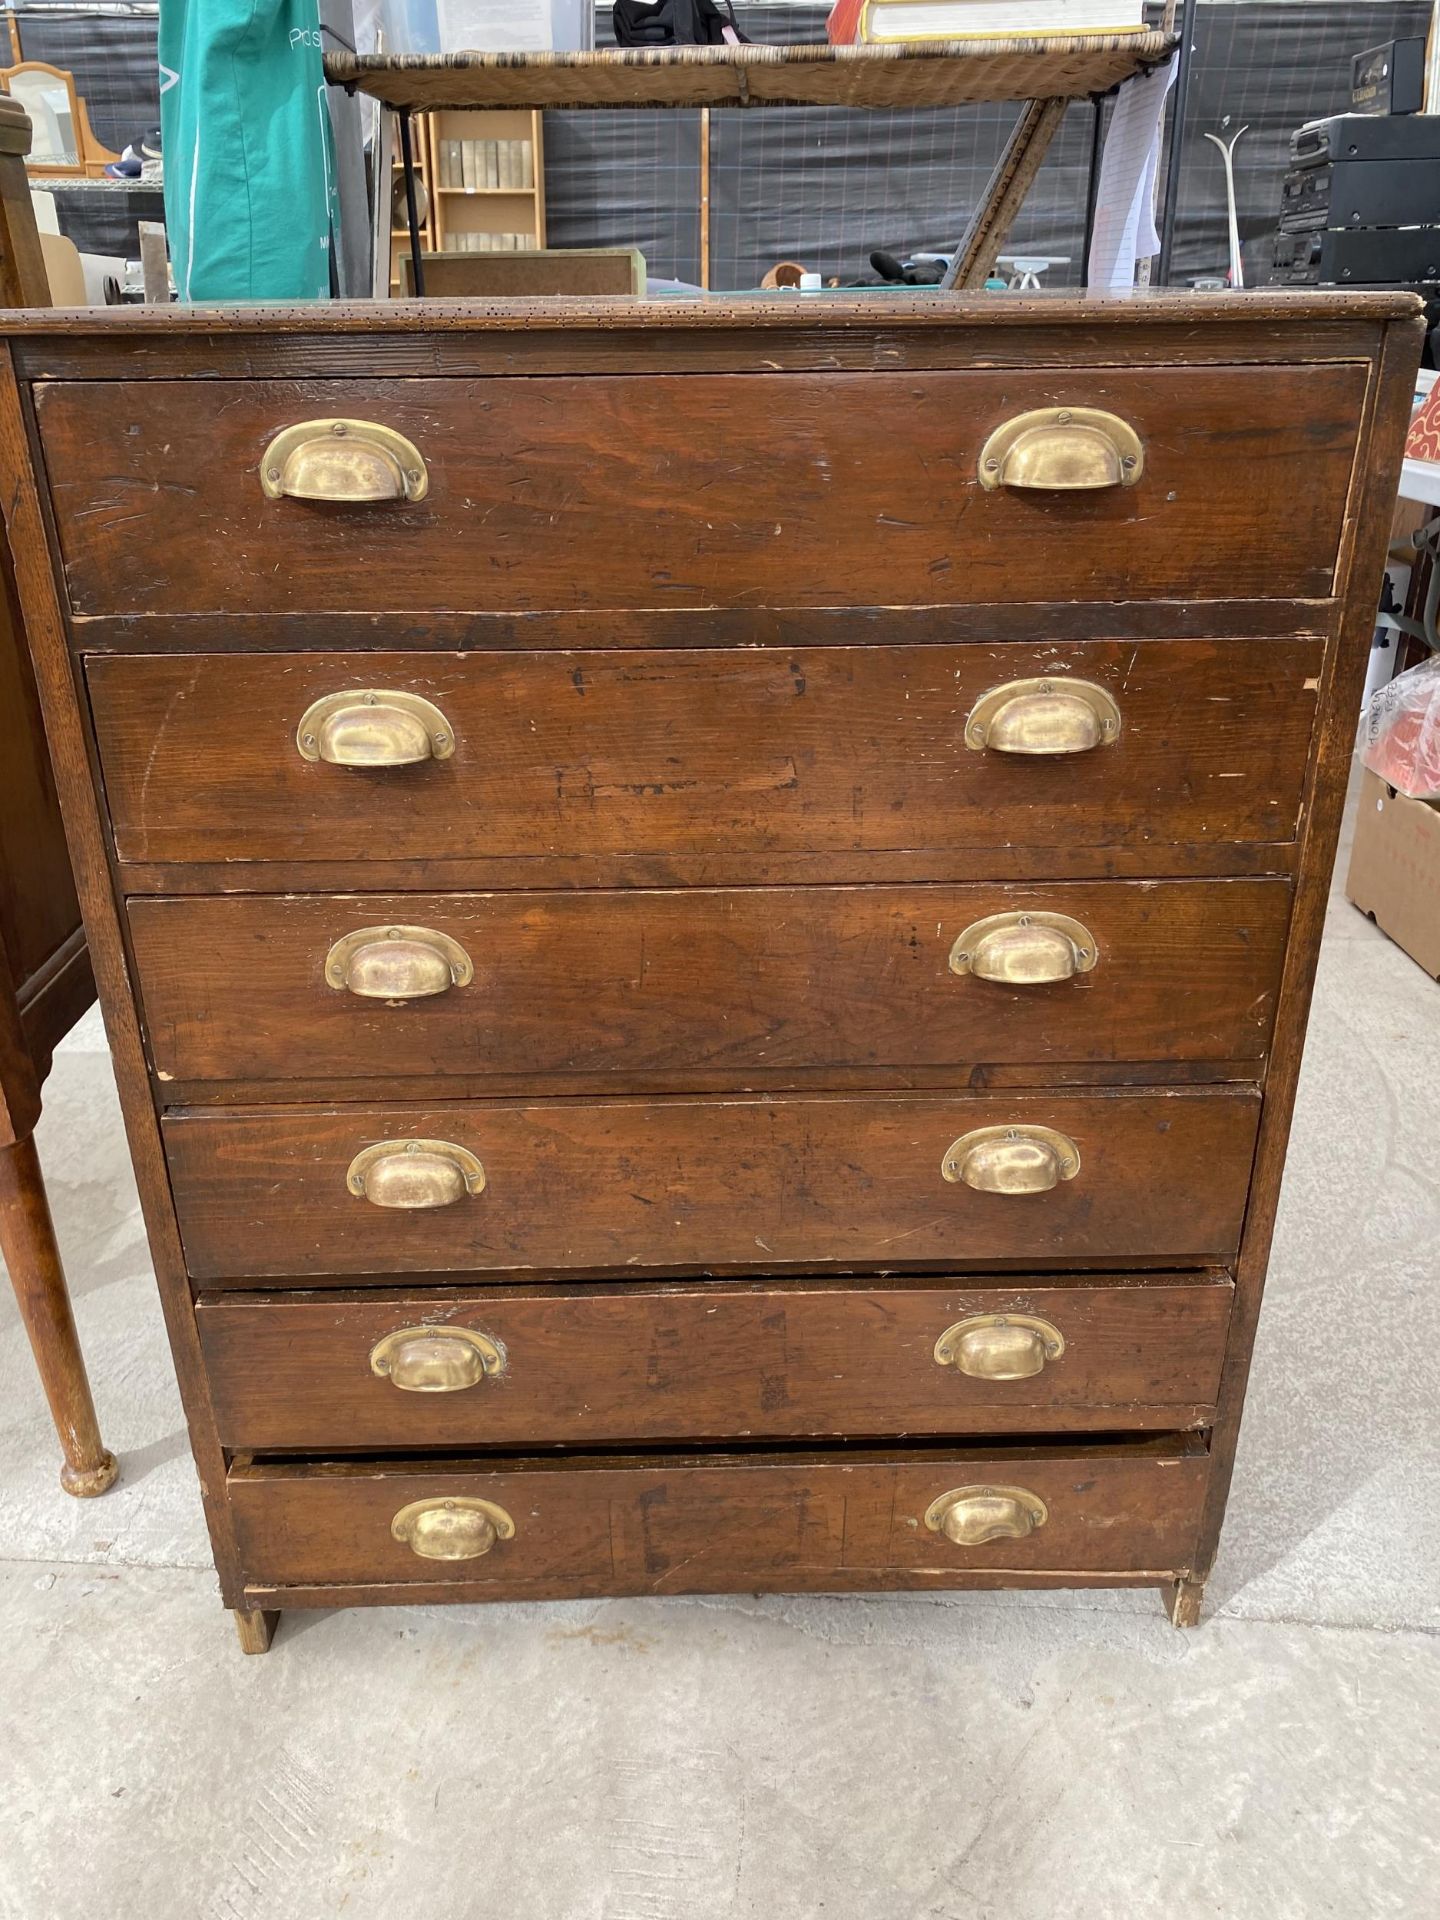 AN EARLY 20TH CENTURY STAINED PINE CHEST OF SIX DRAWERS WITH BRASS SCOOP HANDLES - Image 2 of 3